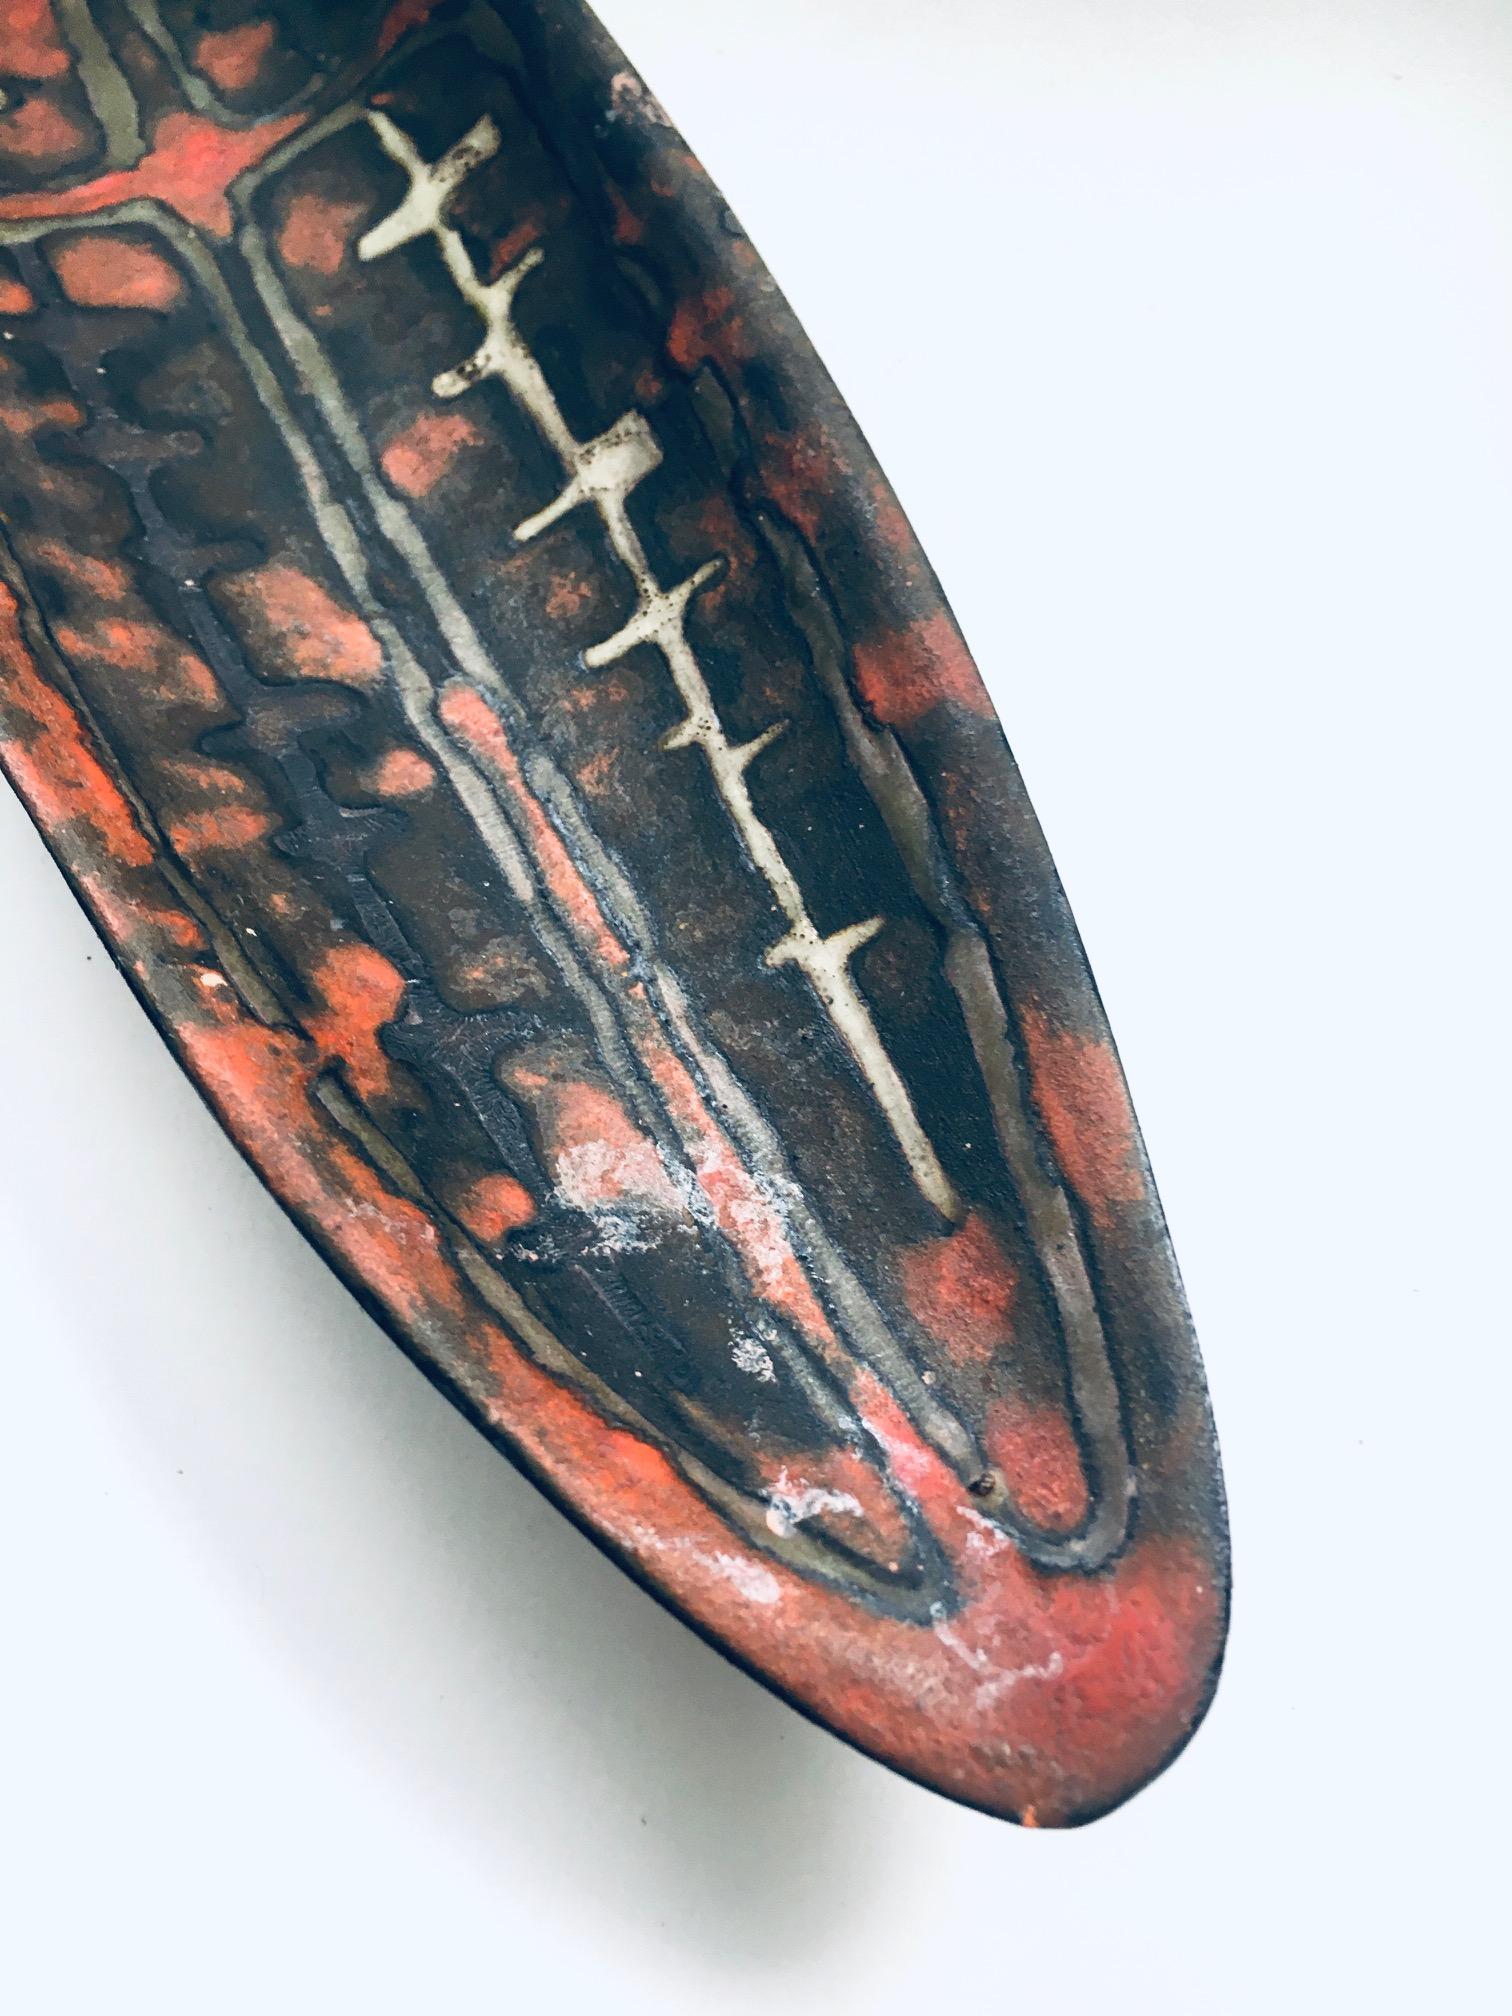 Abstract Art Ceramic Surfboard Bowl Dish by Perignem Studio, Belgium 1960's For Sale 4